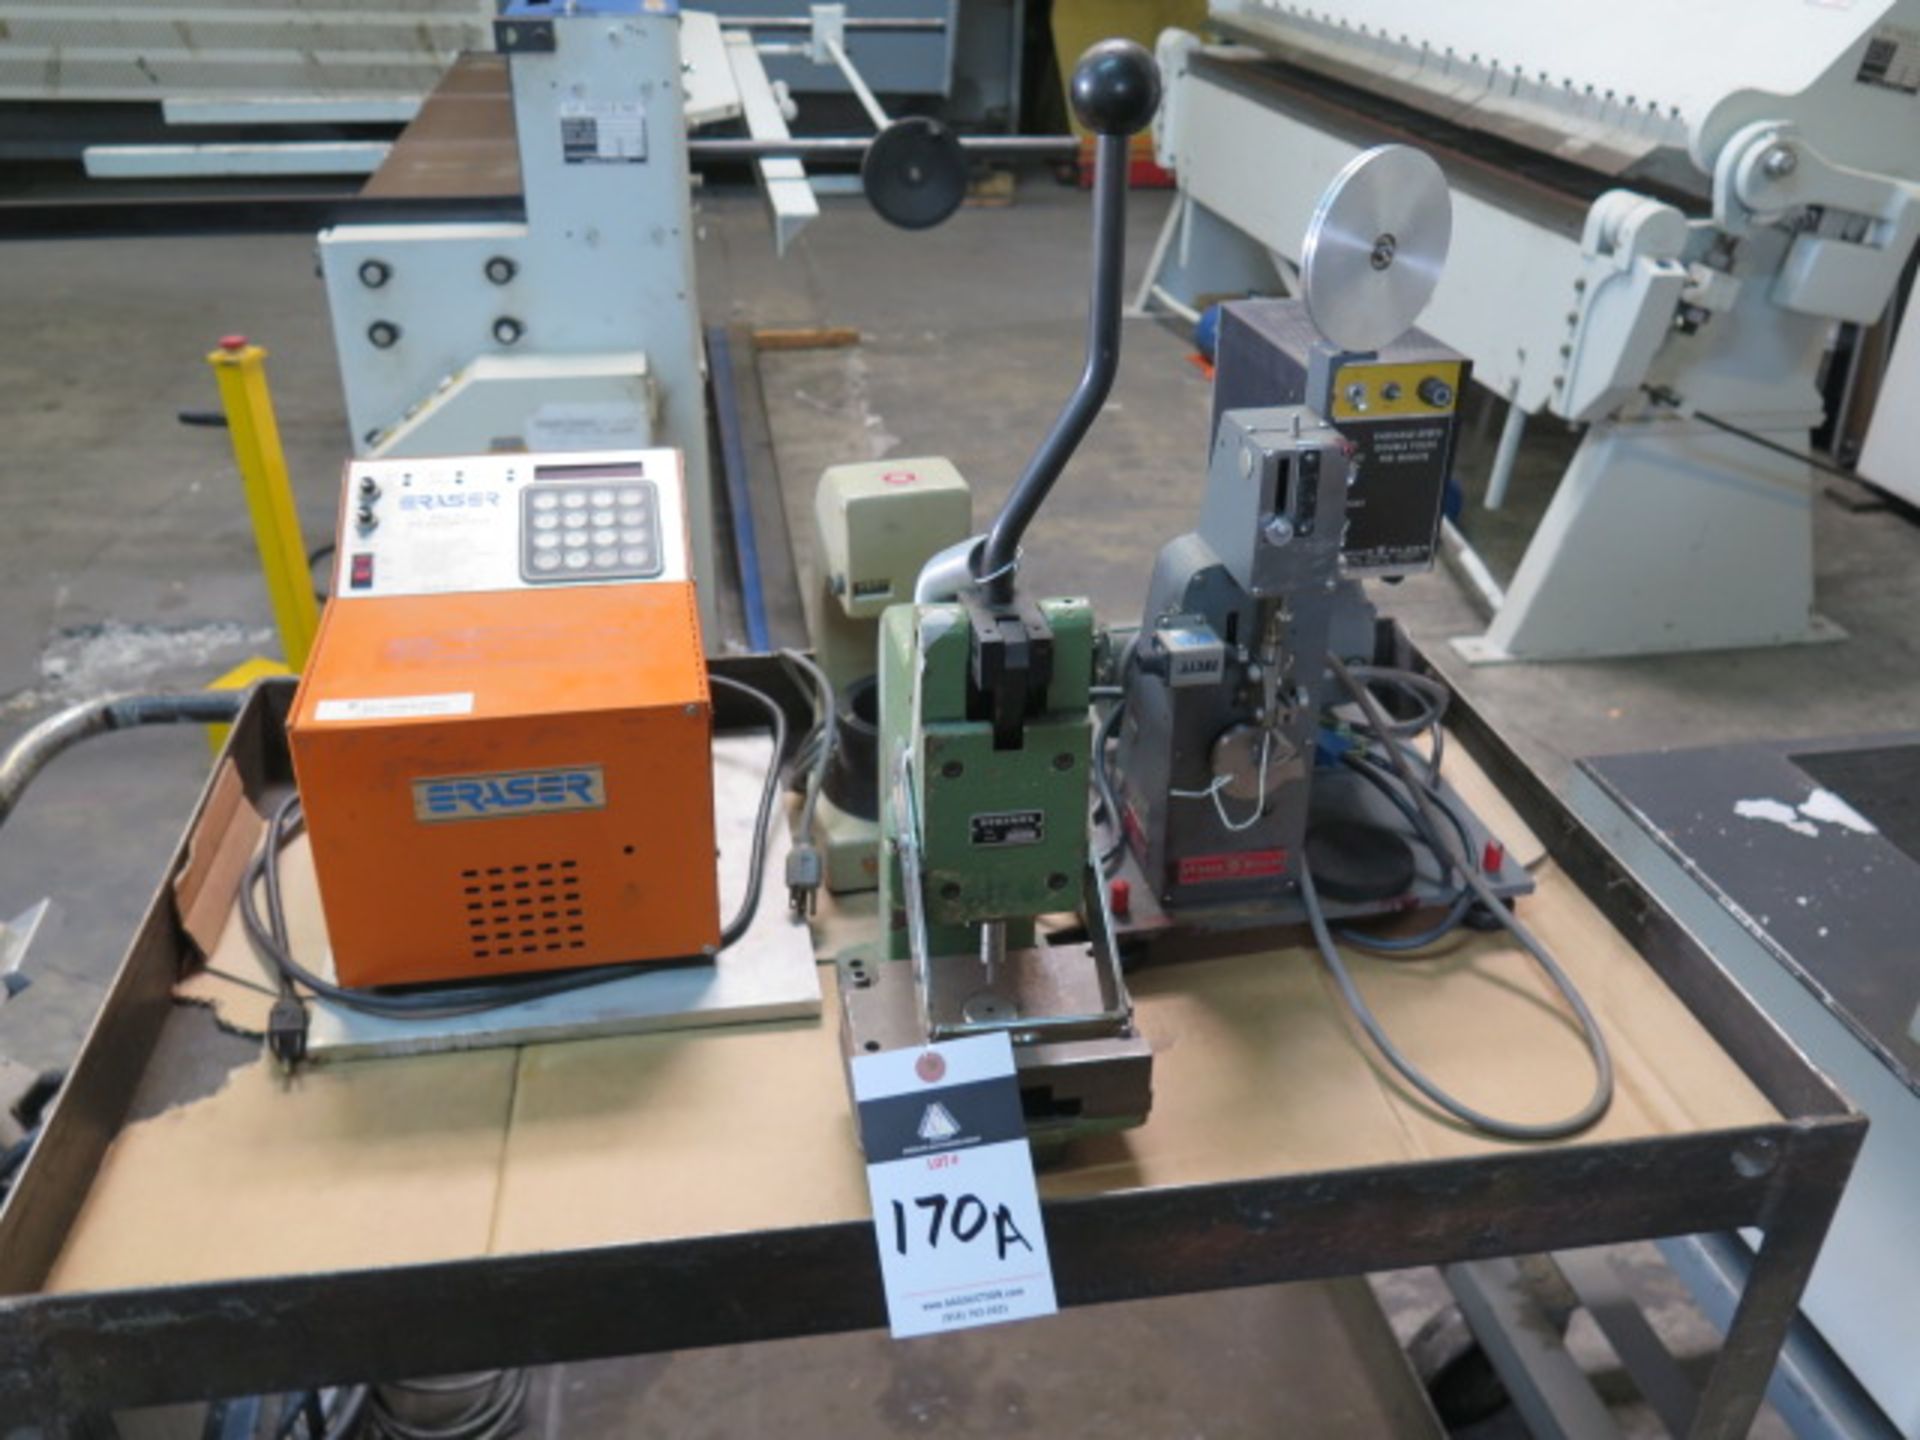 Eraser WC-2 Wire and Tube Cutter, Tinius Olson Testing Machine, Stienel Punch and Shyodu Test devise